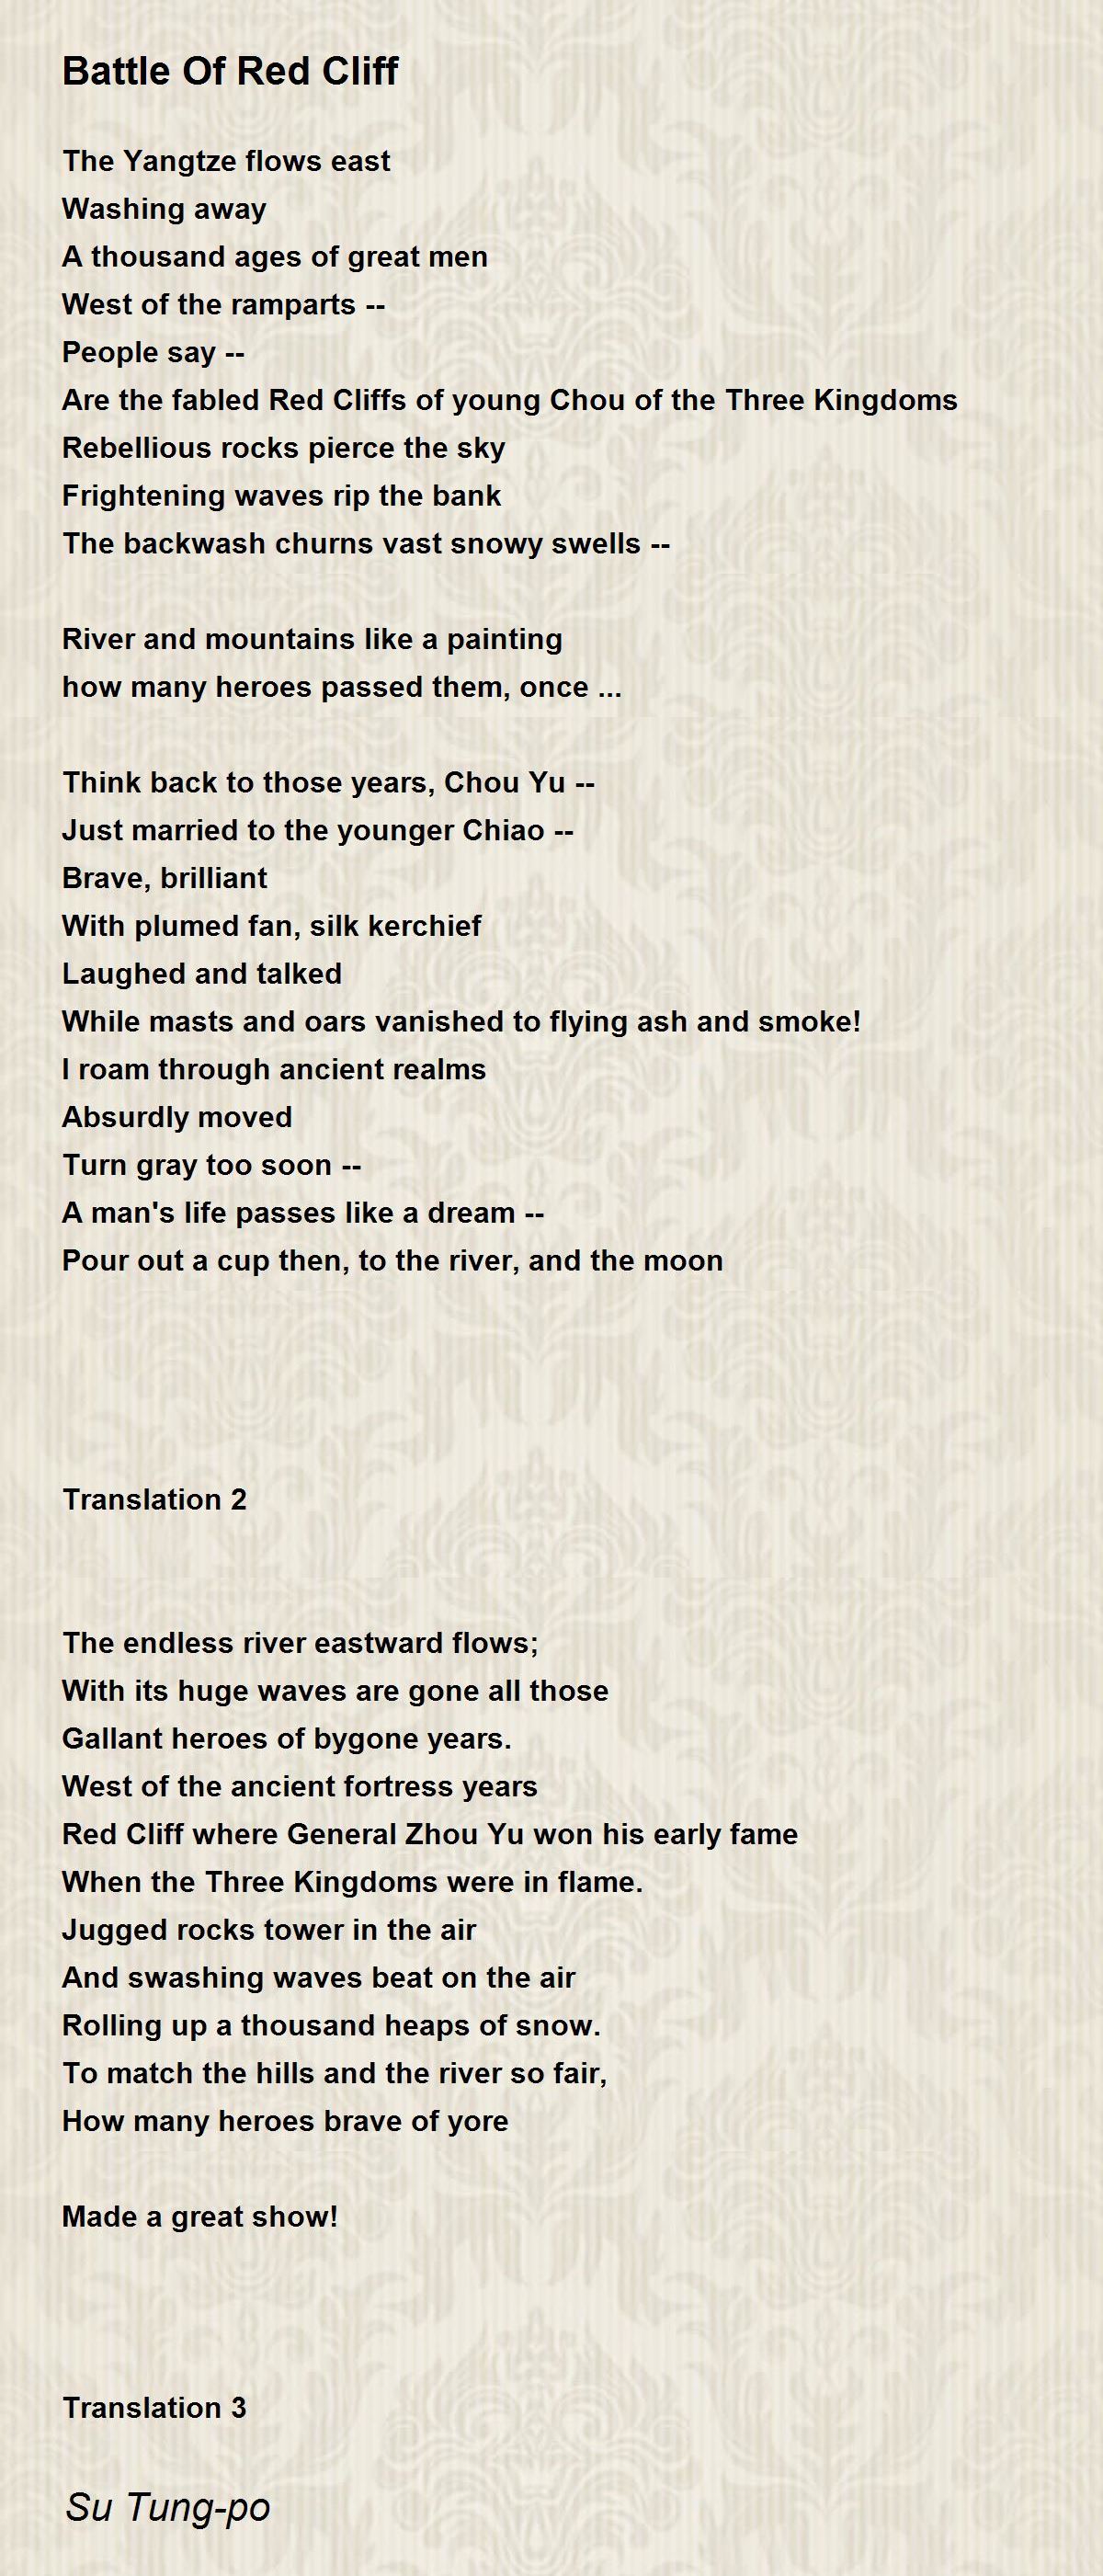 Battle Of Red Cliff Poem by Su Tung-po - Poem Hunter